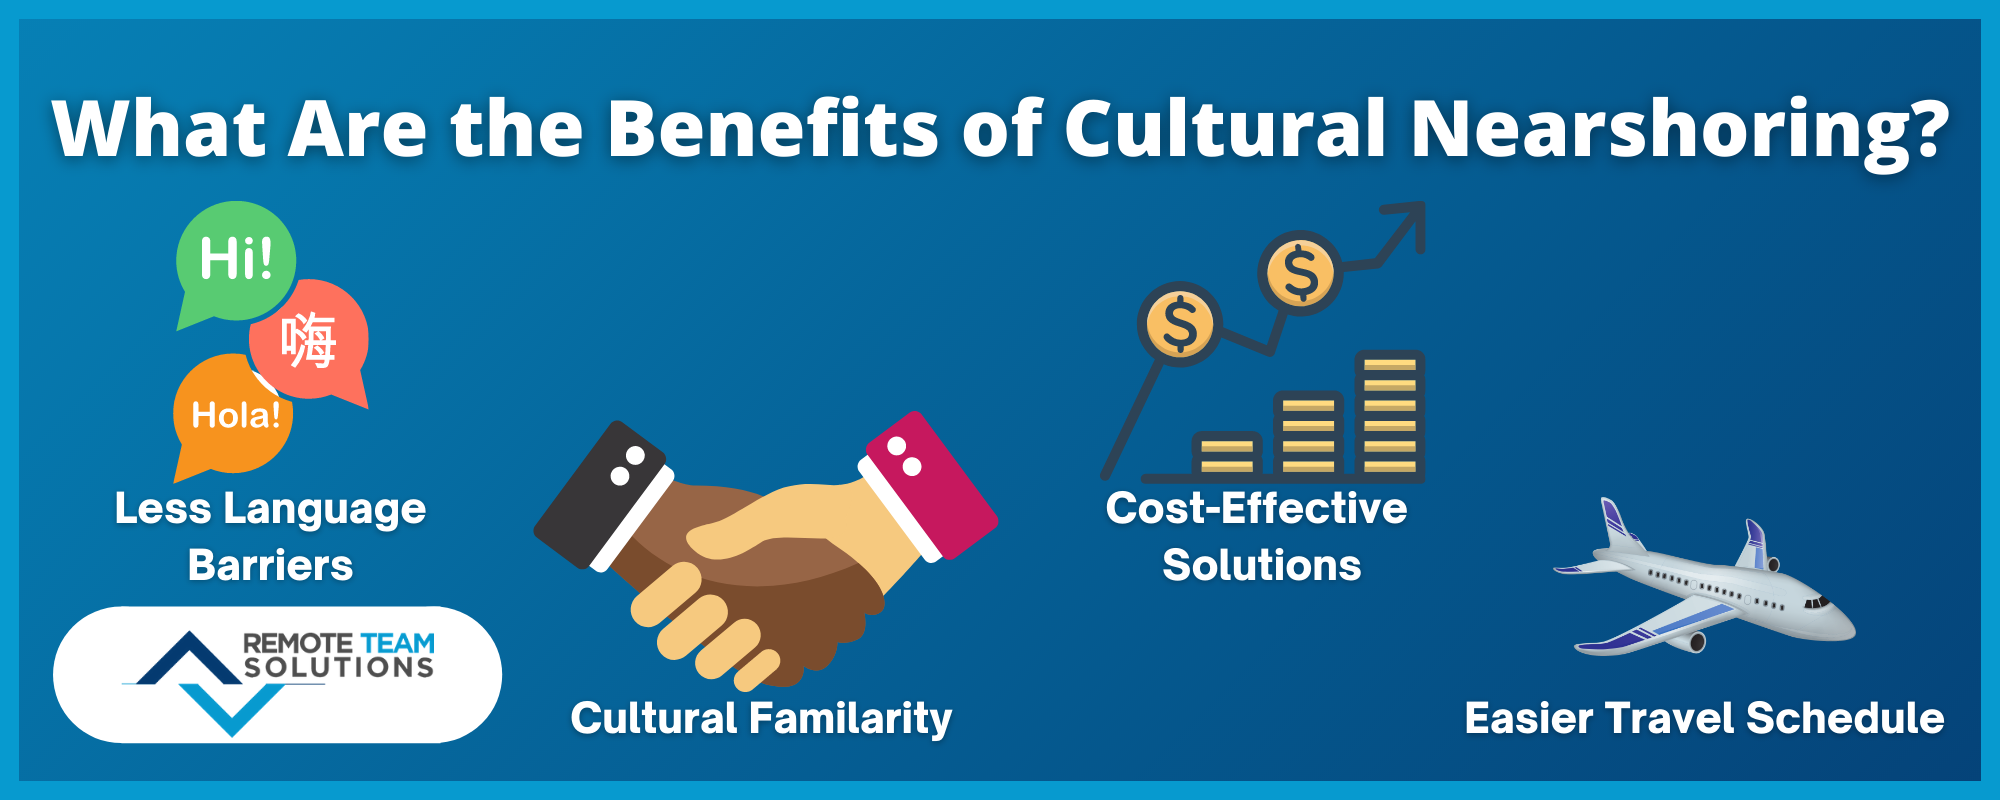 Infographic explaining benefits of cultural nearshoring